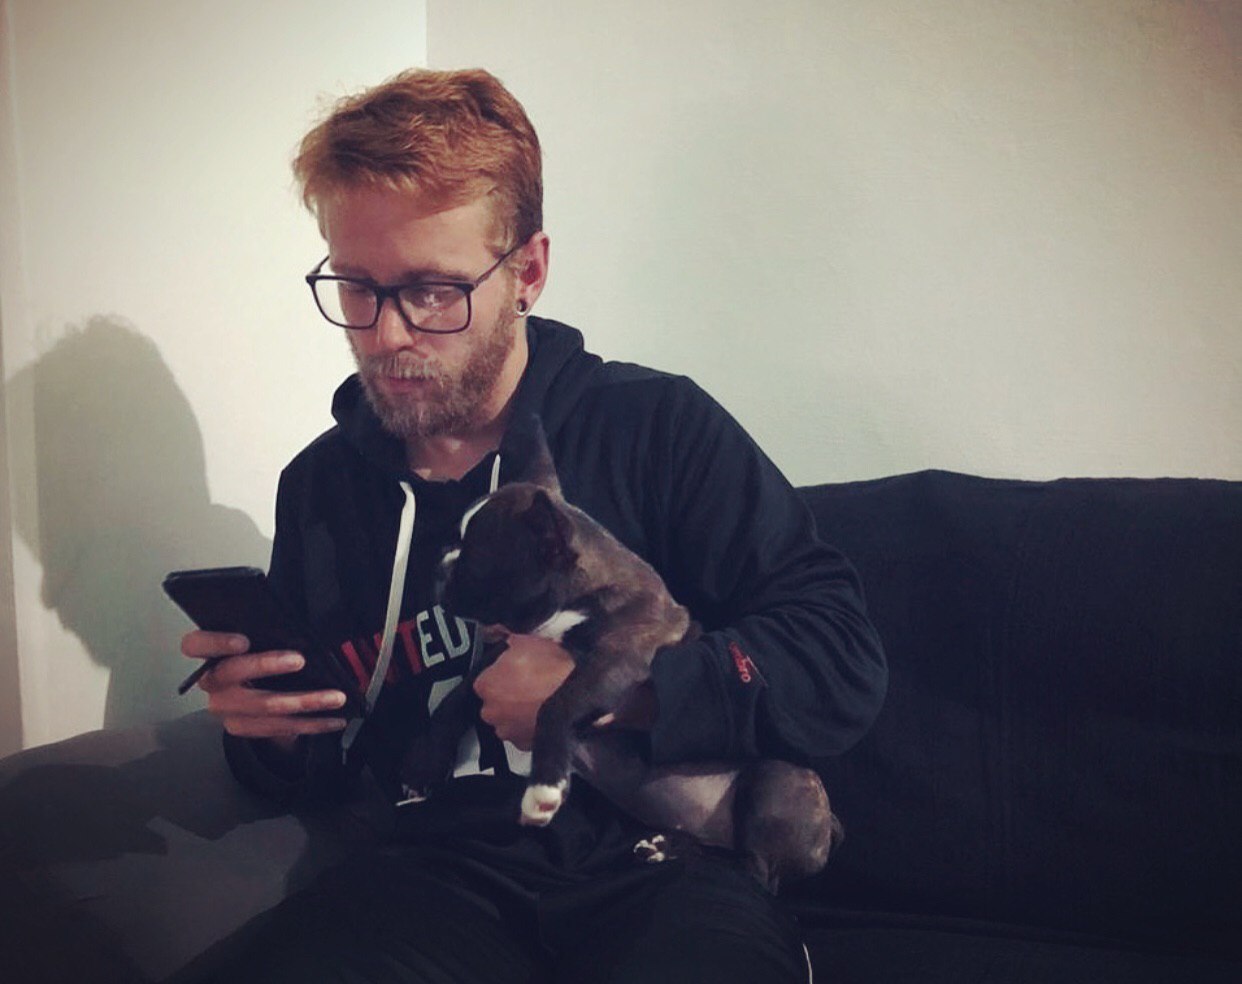 Photo of me and my dog on the sofa ordering food.